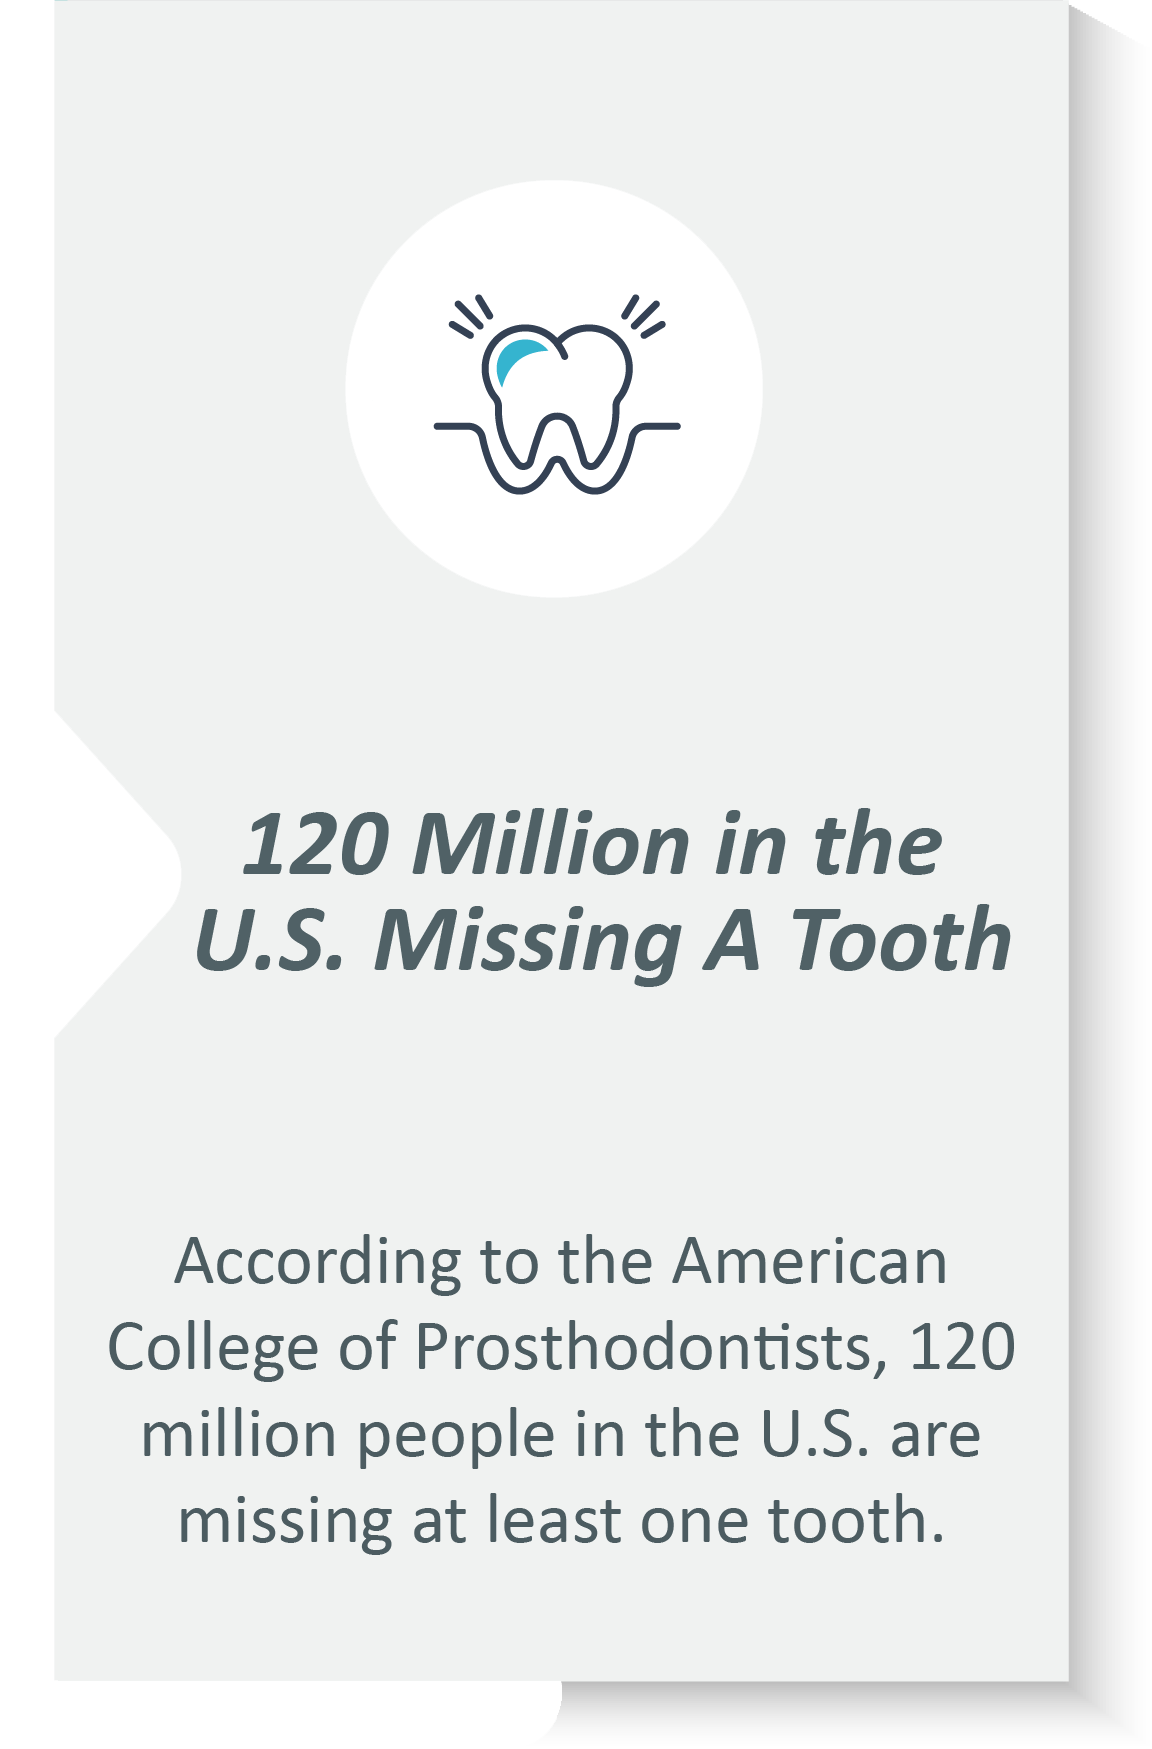 Dental restorations infographic: According to the American College of Prosthodontists, 120 million people in the U.S. are missing at least one tooth.